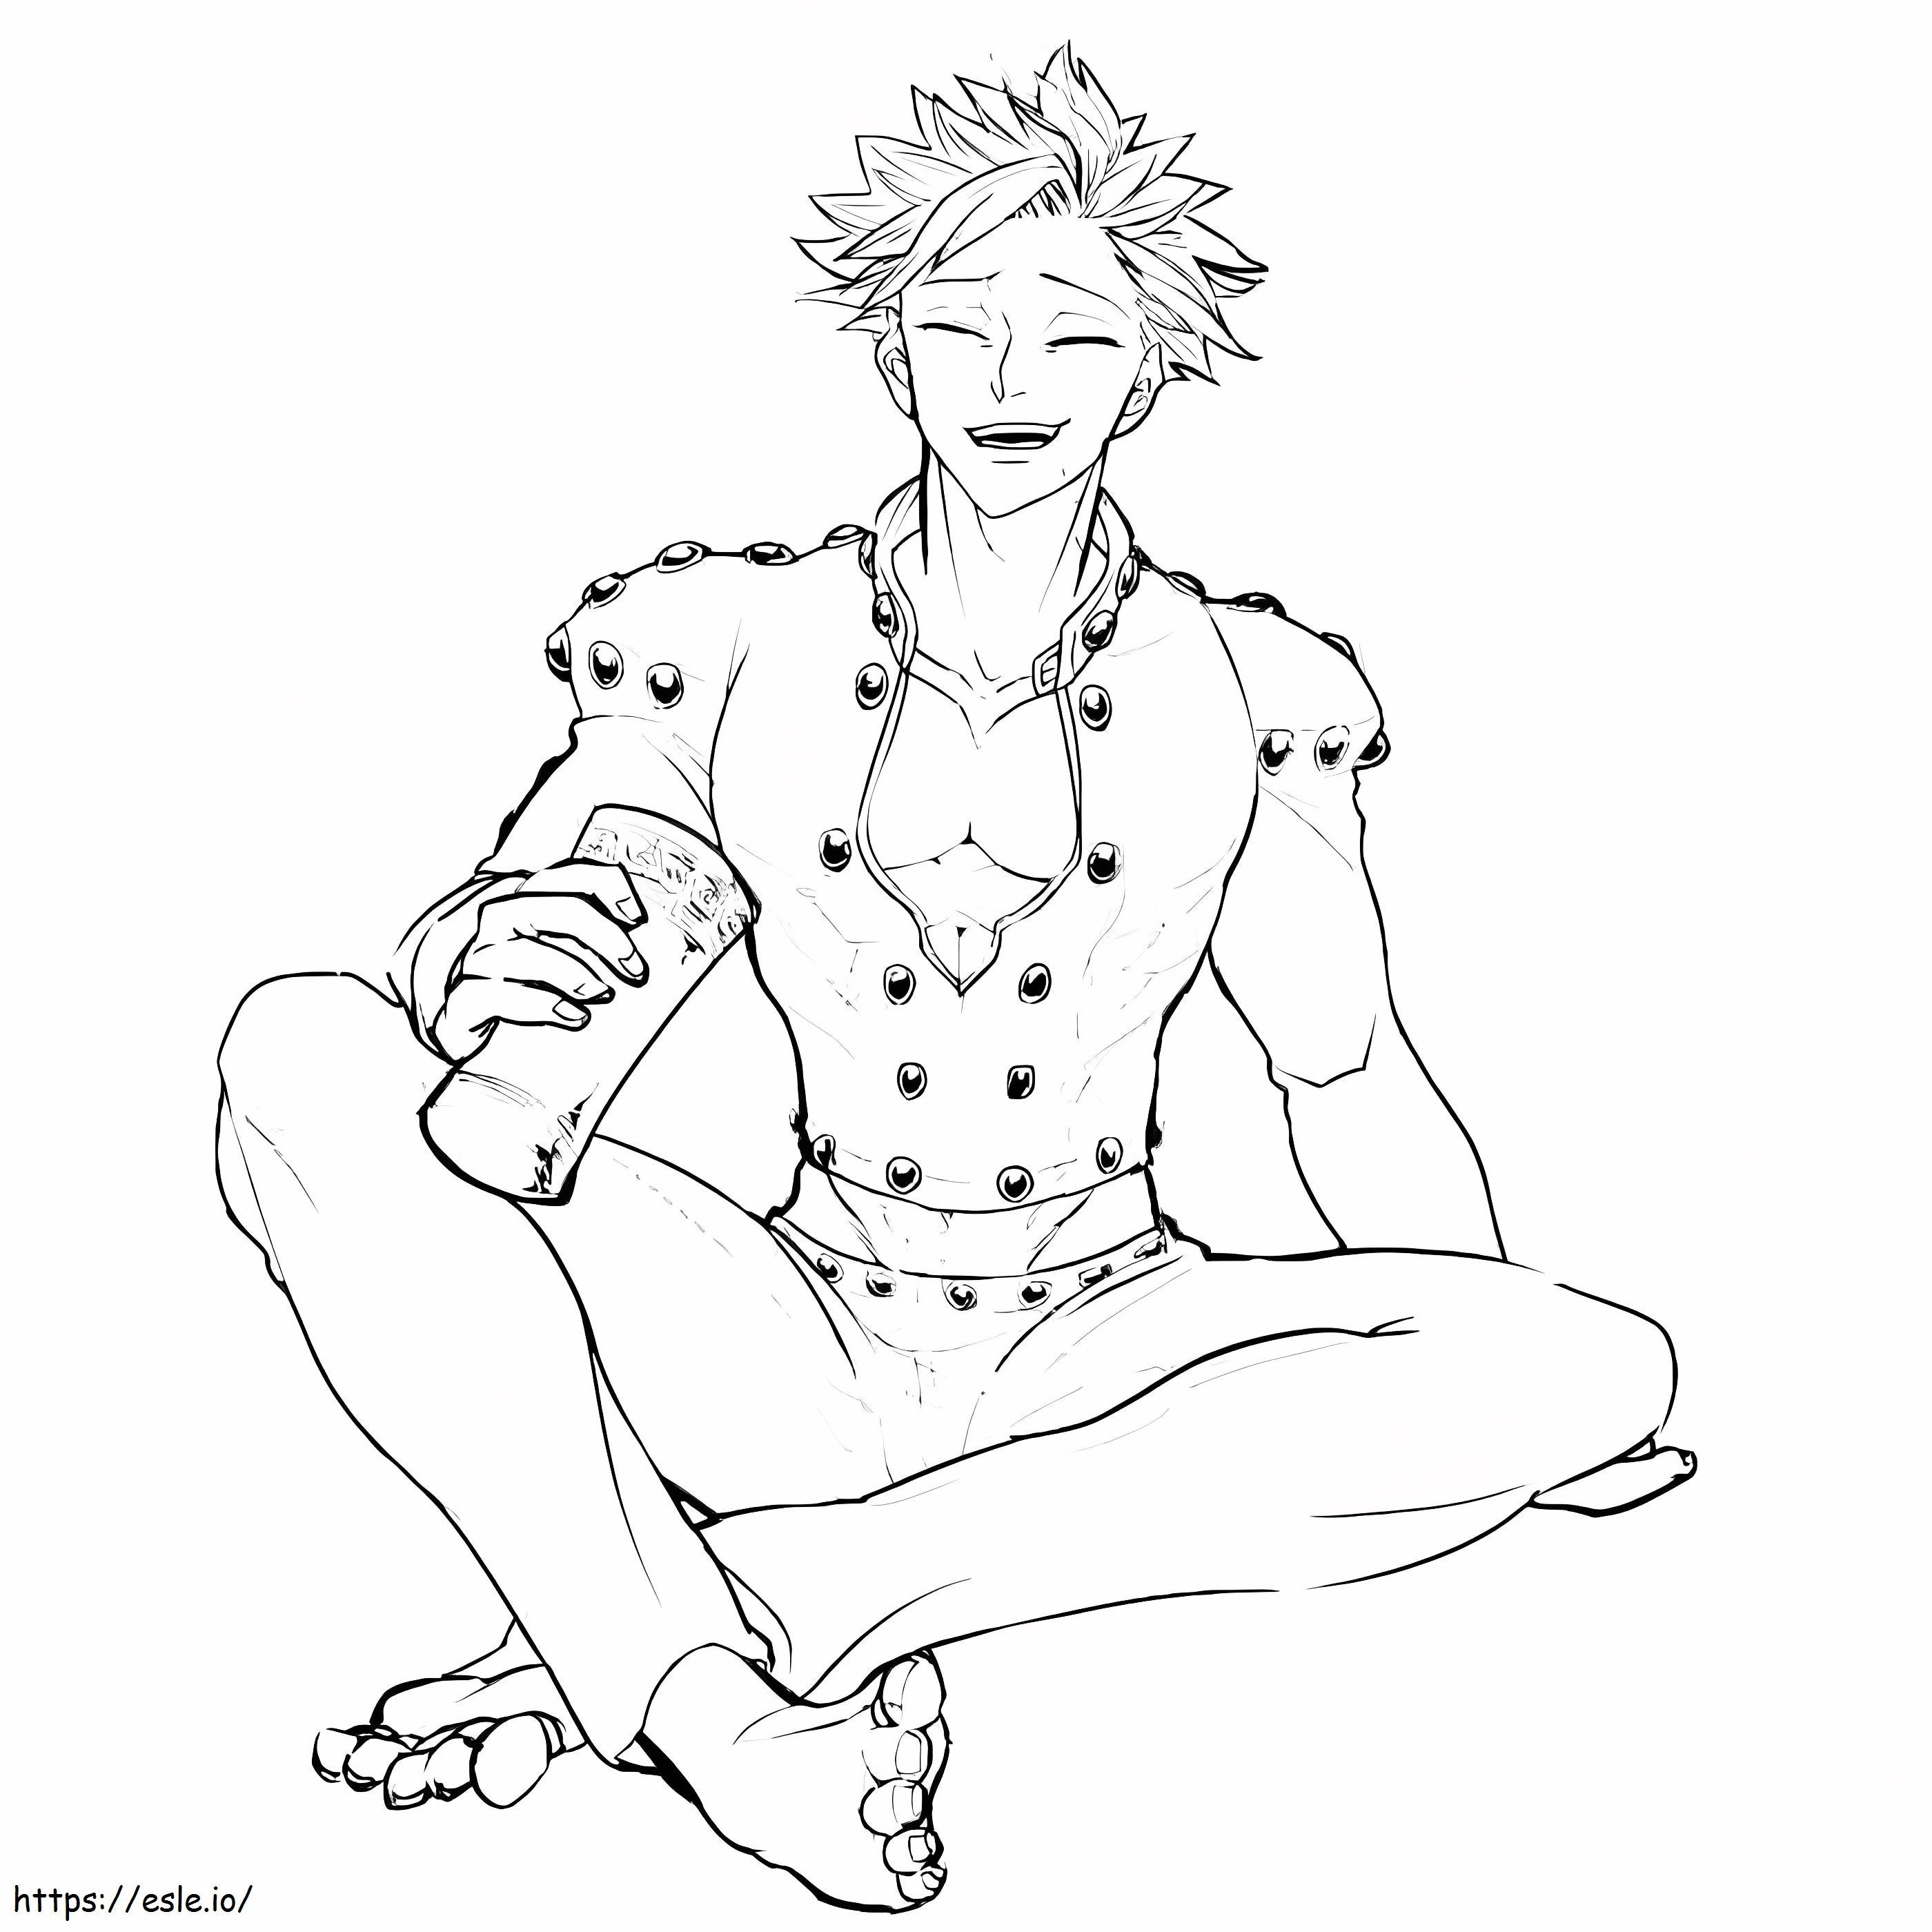 Ban Sitting And Smiling coloring page